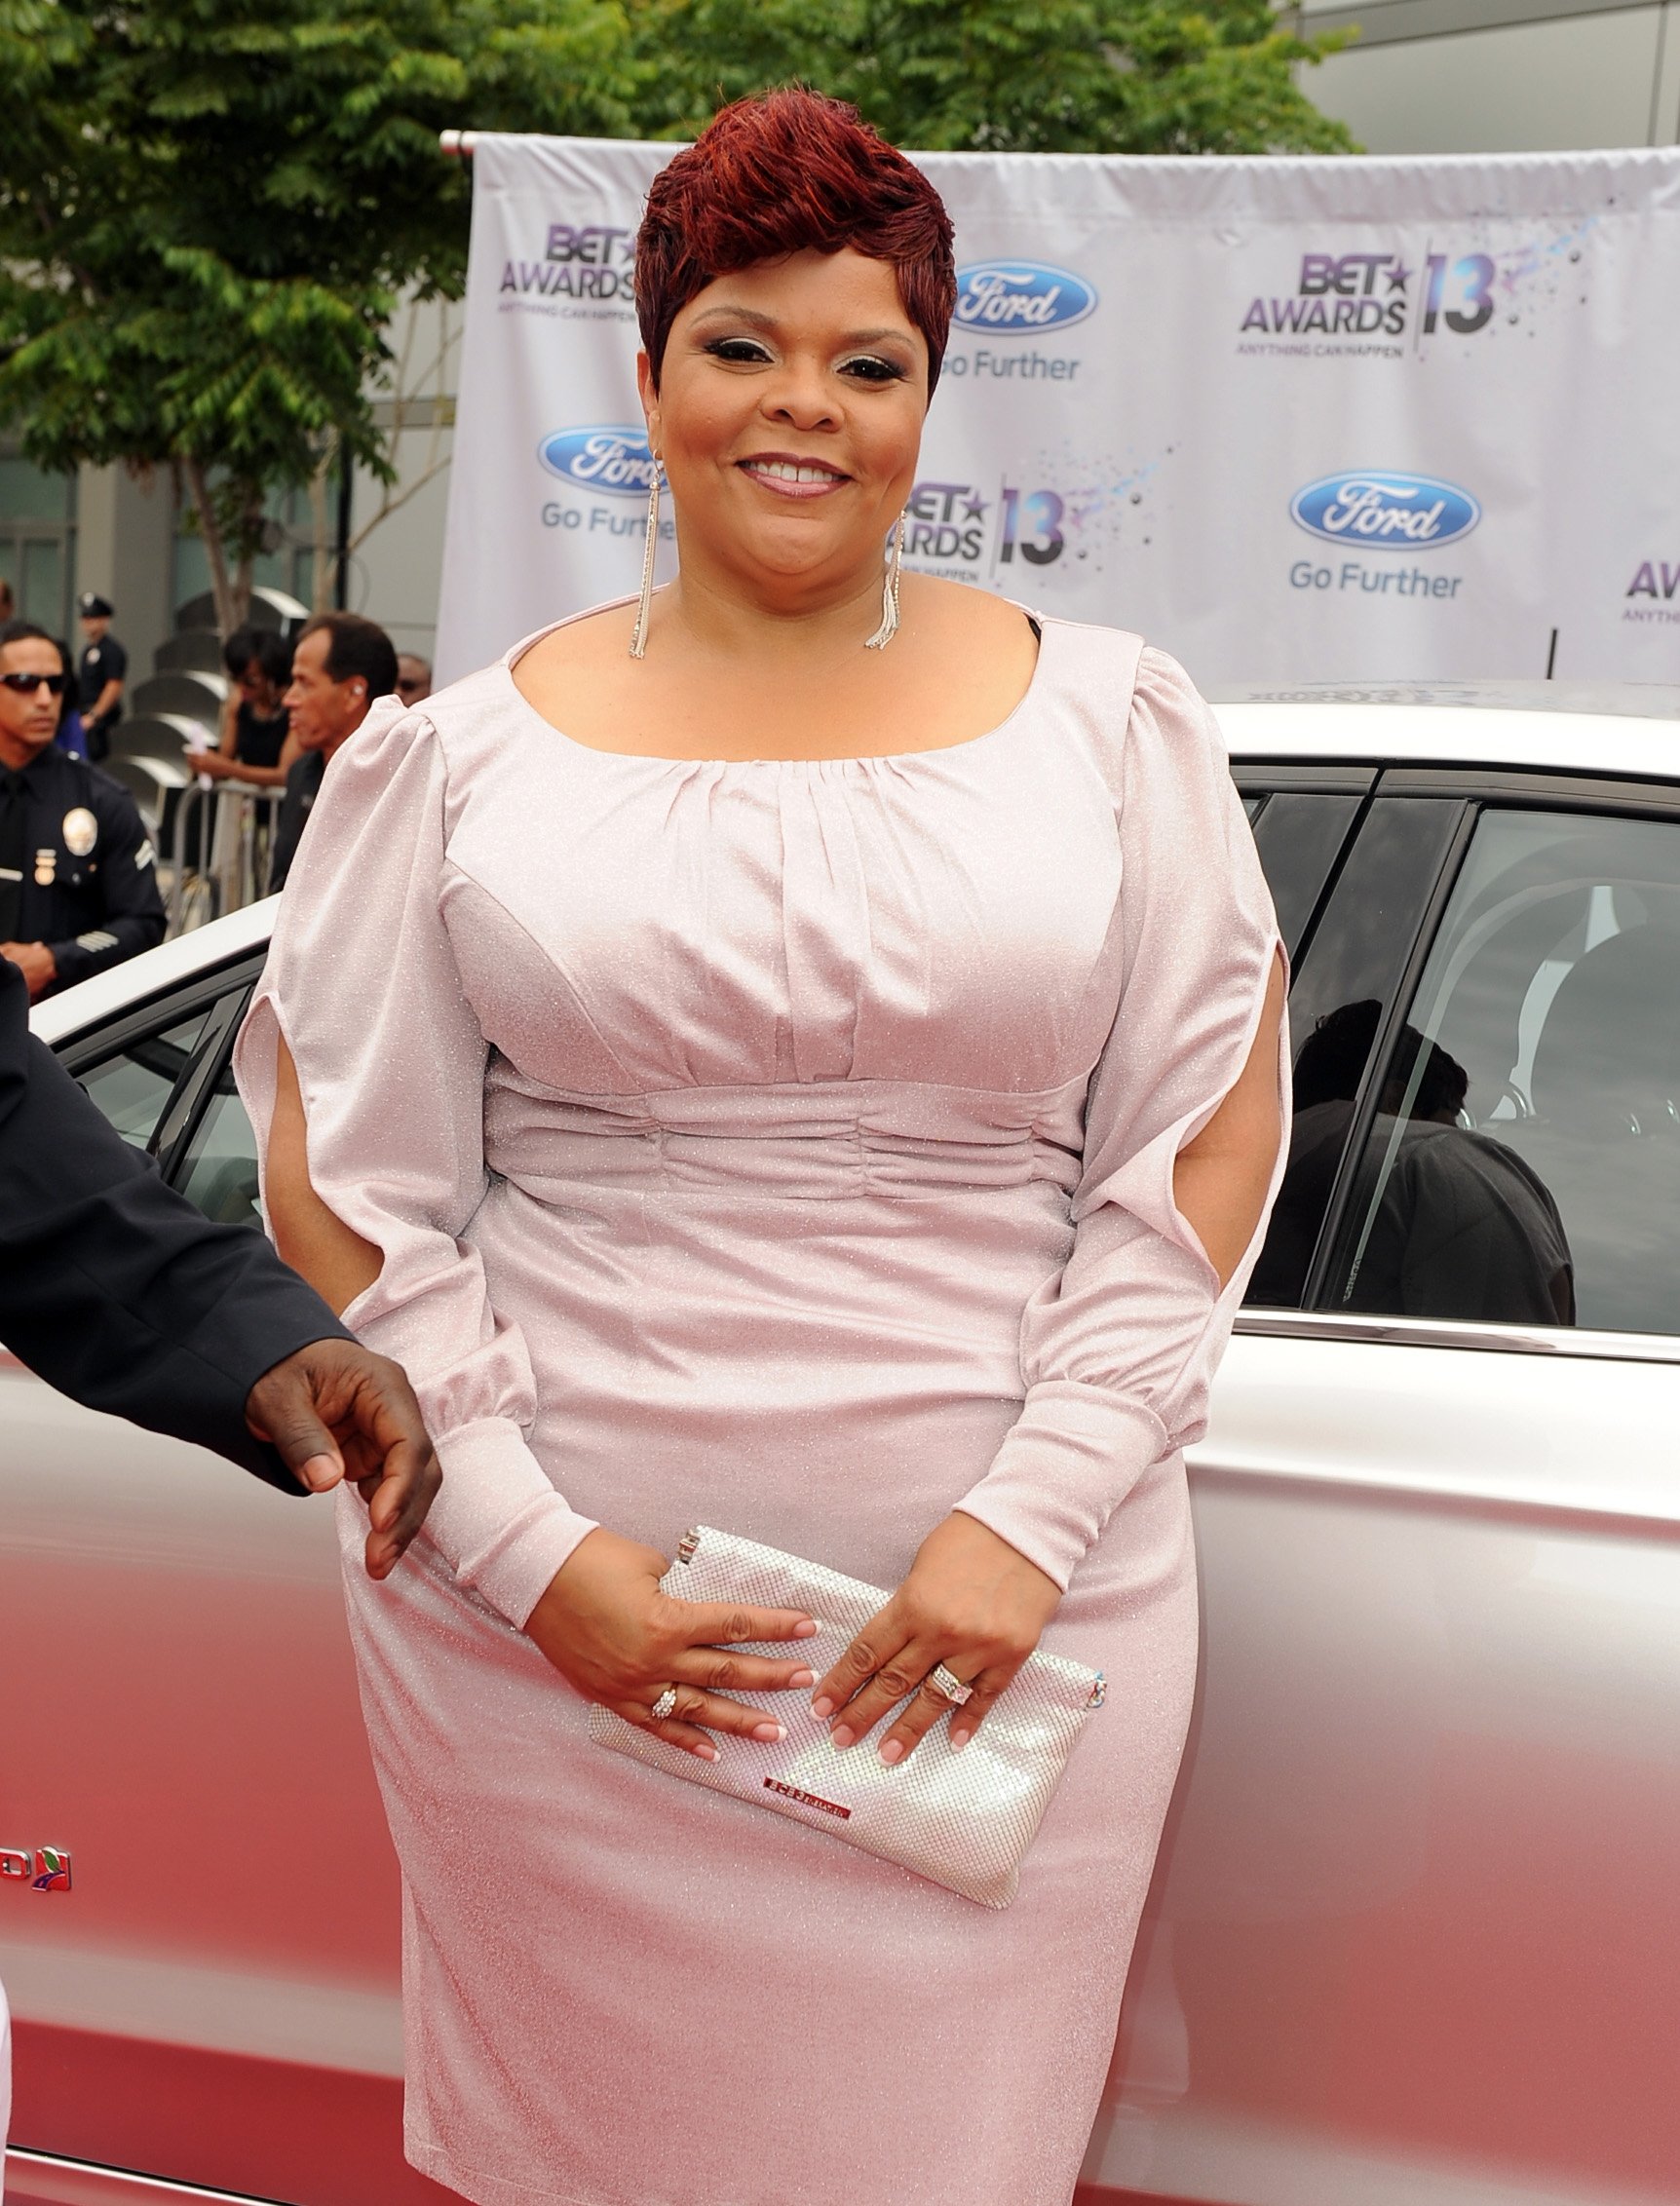 Tamela Mann attends the Ford Red Carpet at the 2013 BET Awards at Nokia Theatre L.A. Live on June 30, 2013. | Photo: Getty Images